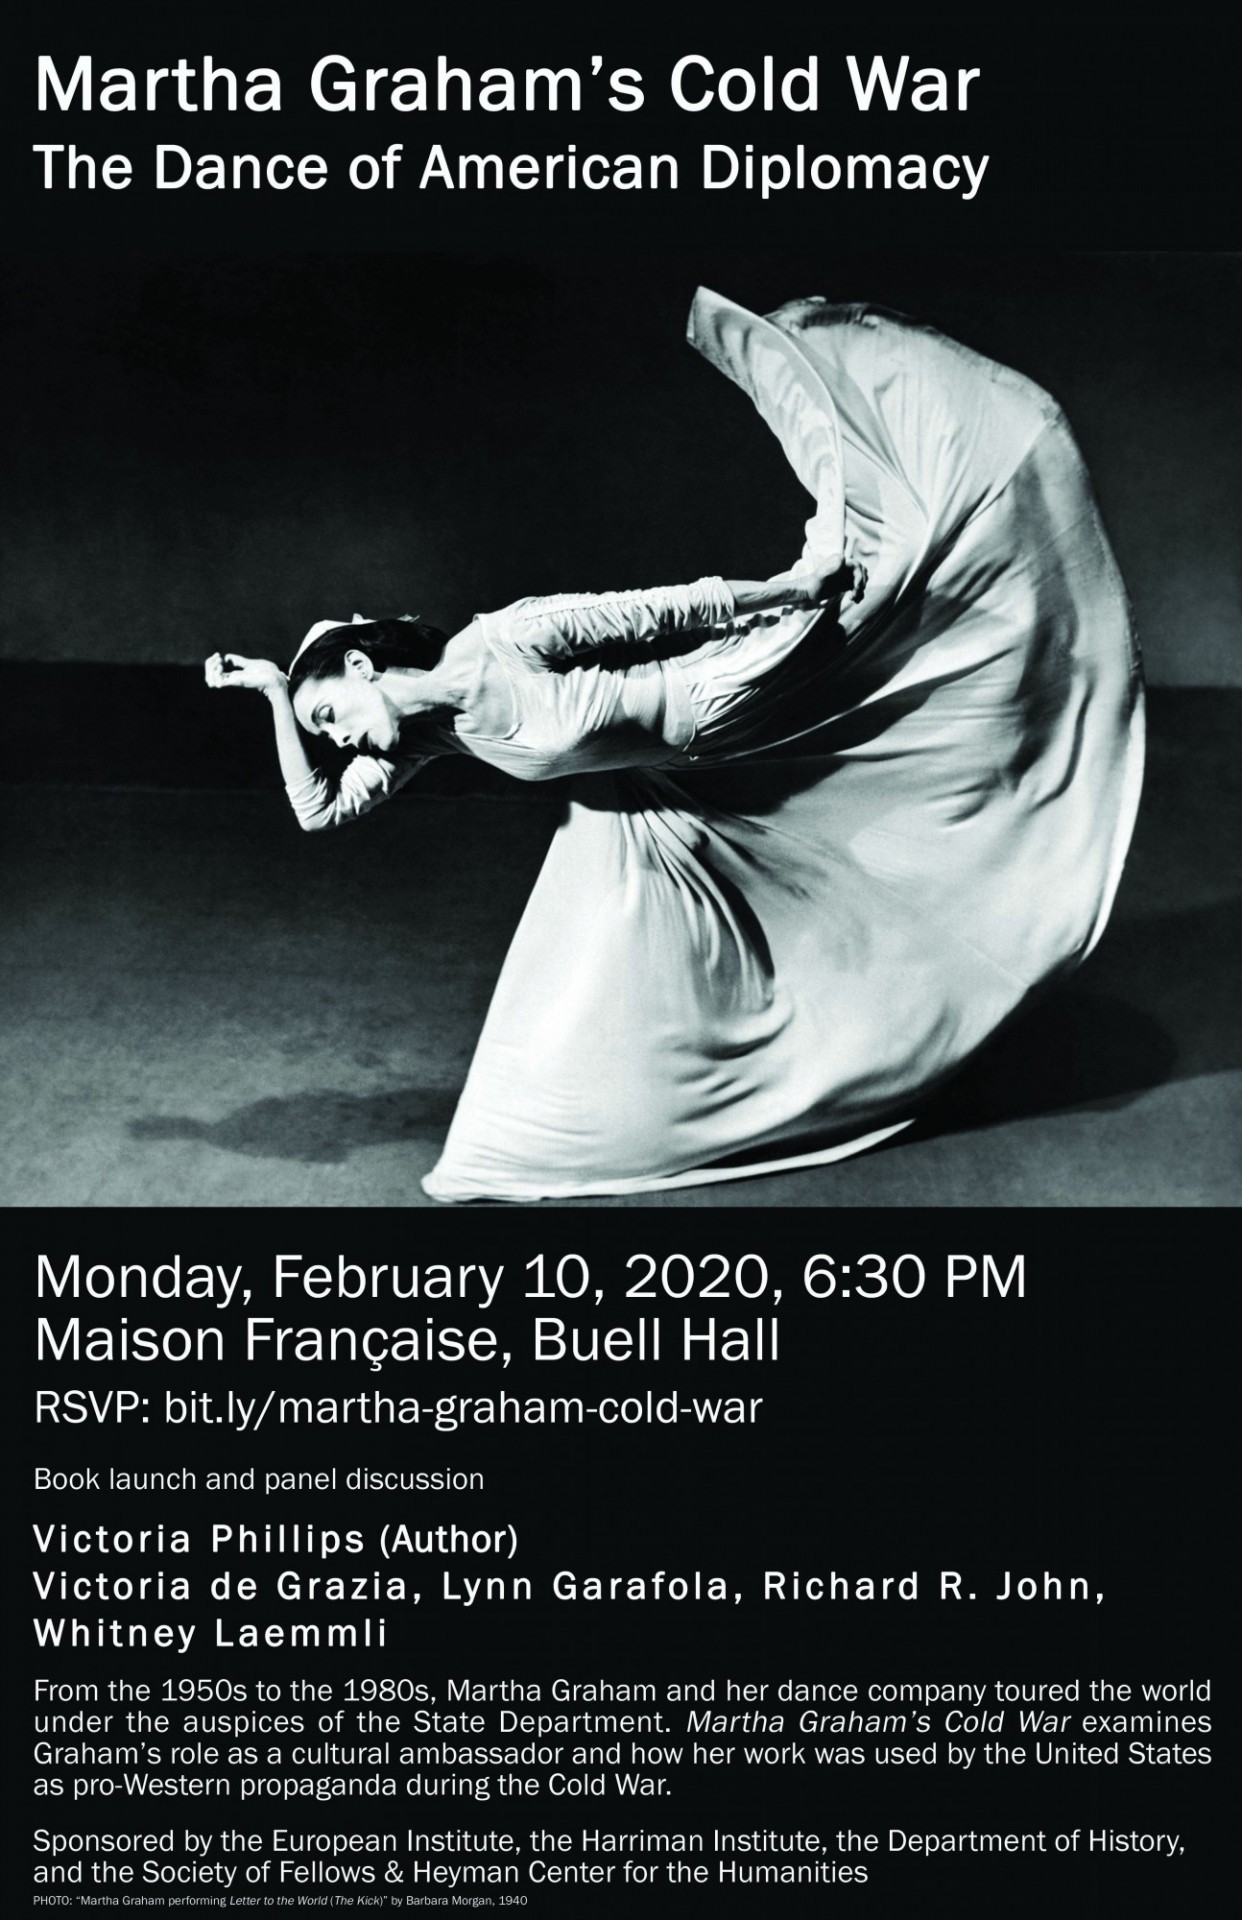 Flyer advertising book launch event for Martha Graham’s Cold War: the Dance of American Diplomacy